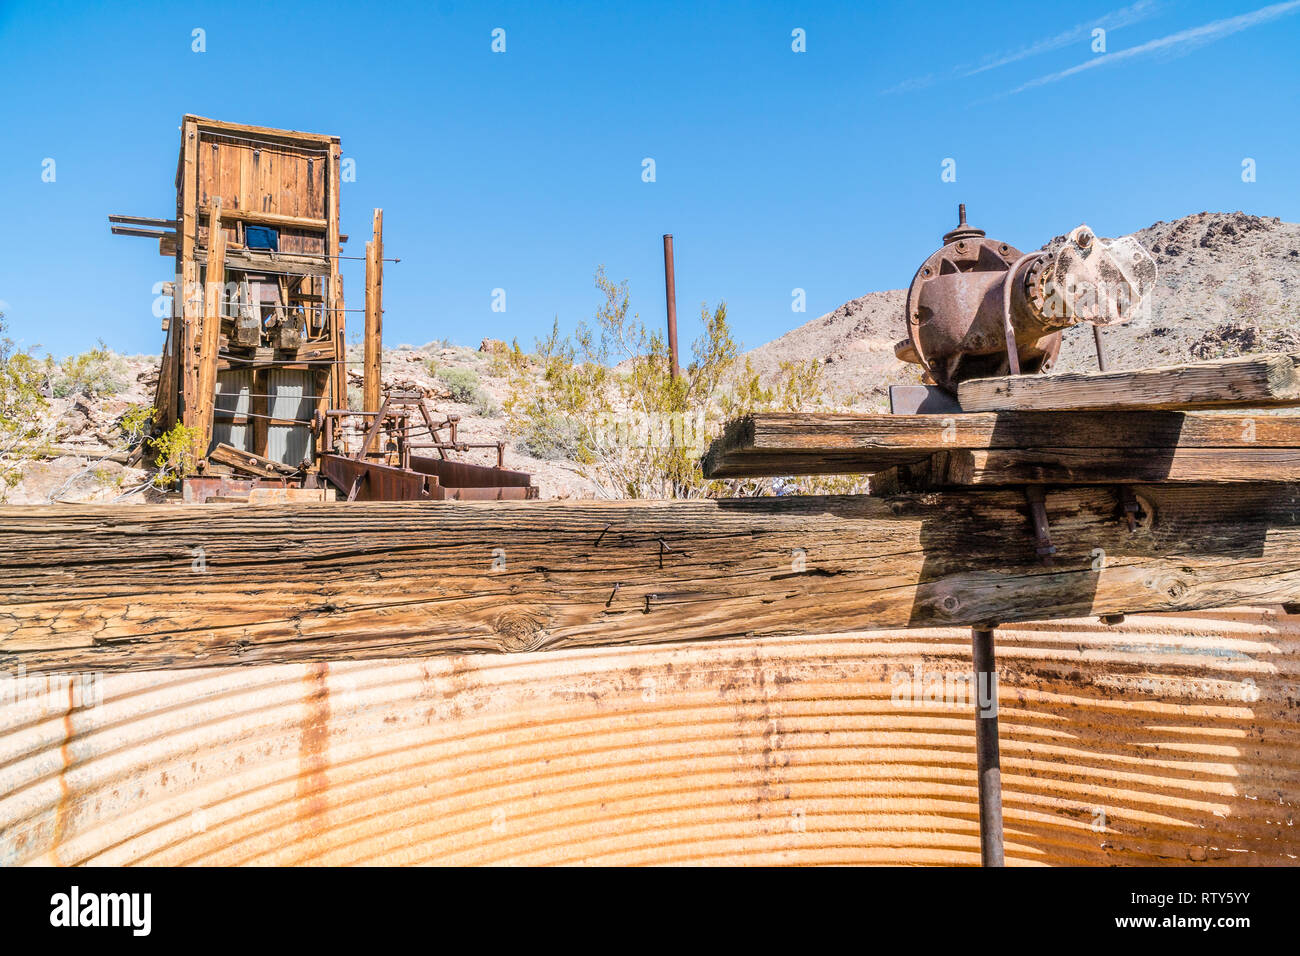 Rusted metal mining equipment at the Inyo Mine. The Inyo Mine ruins were a part of the Echo-Lee mining district located in the Echo Canyon in Death Va Stock Photo